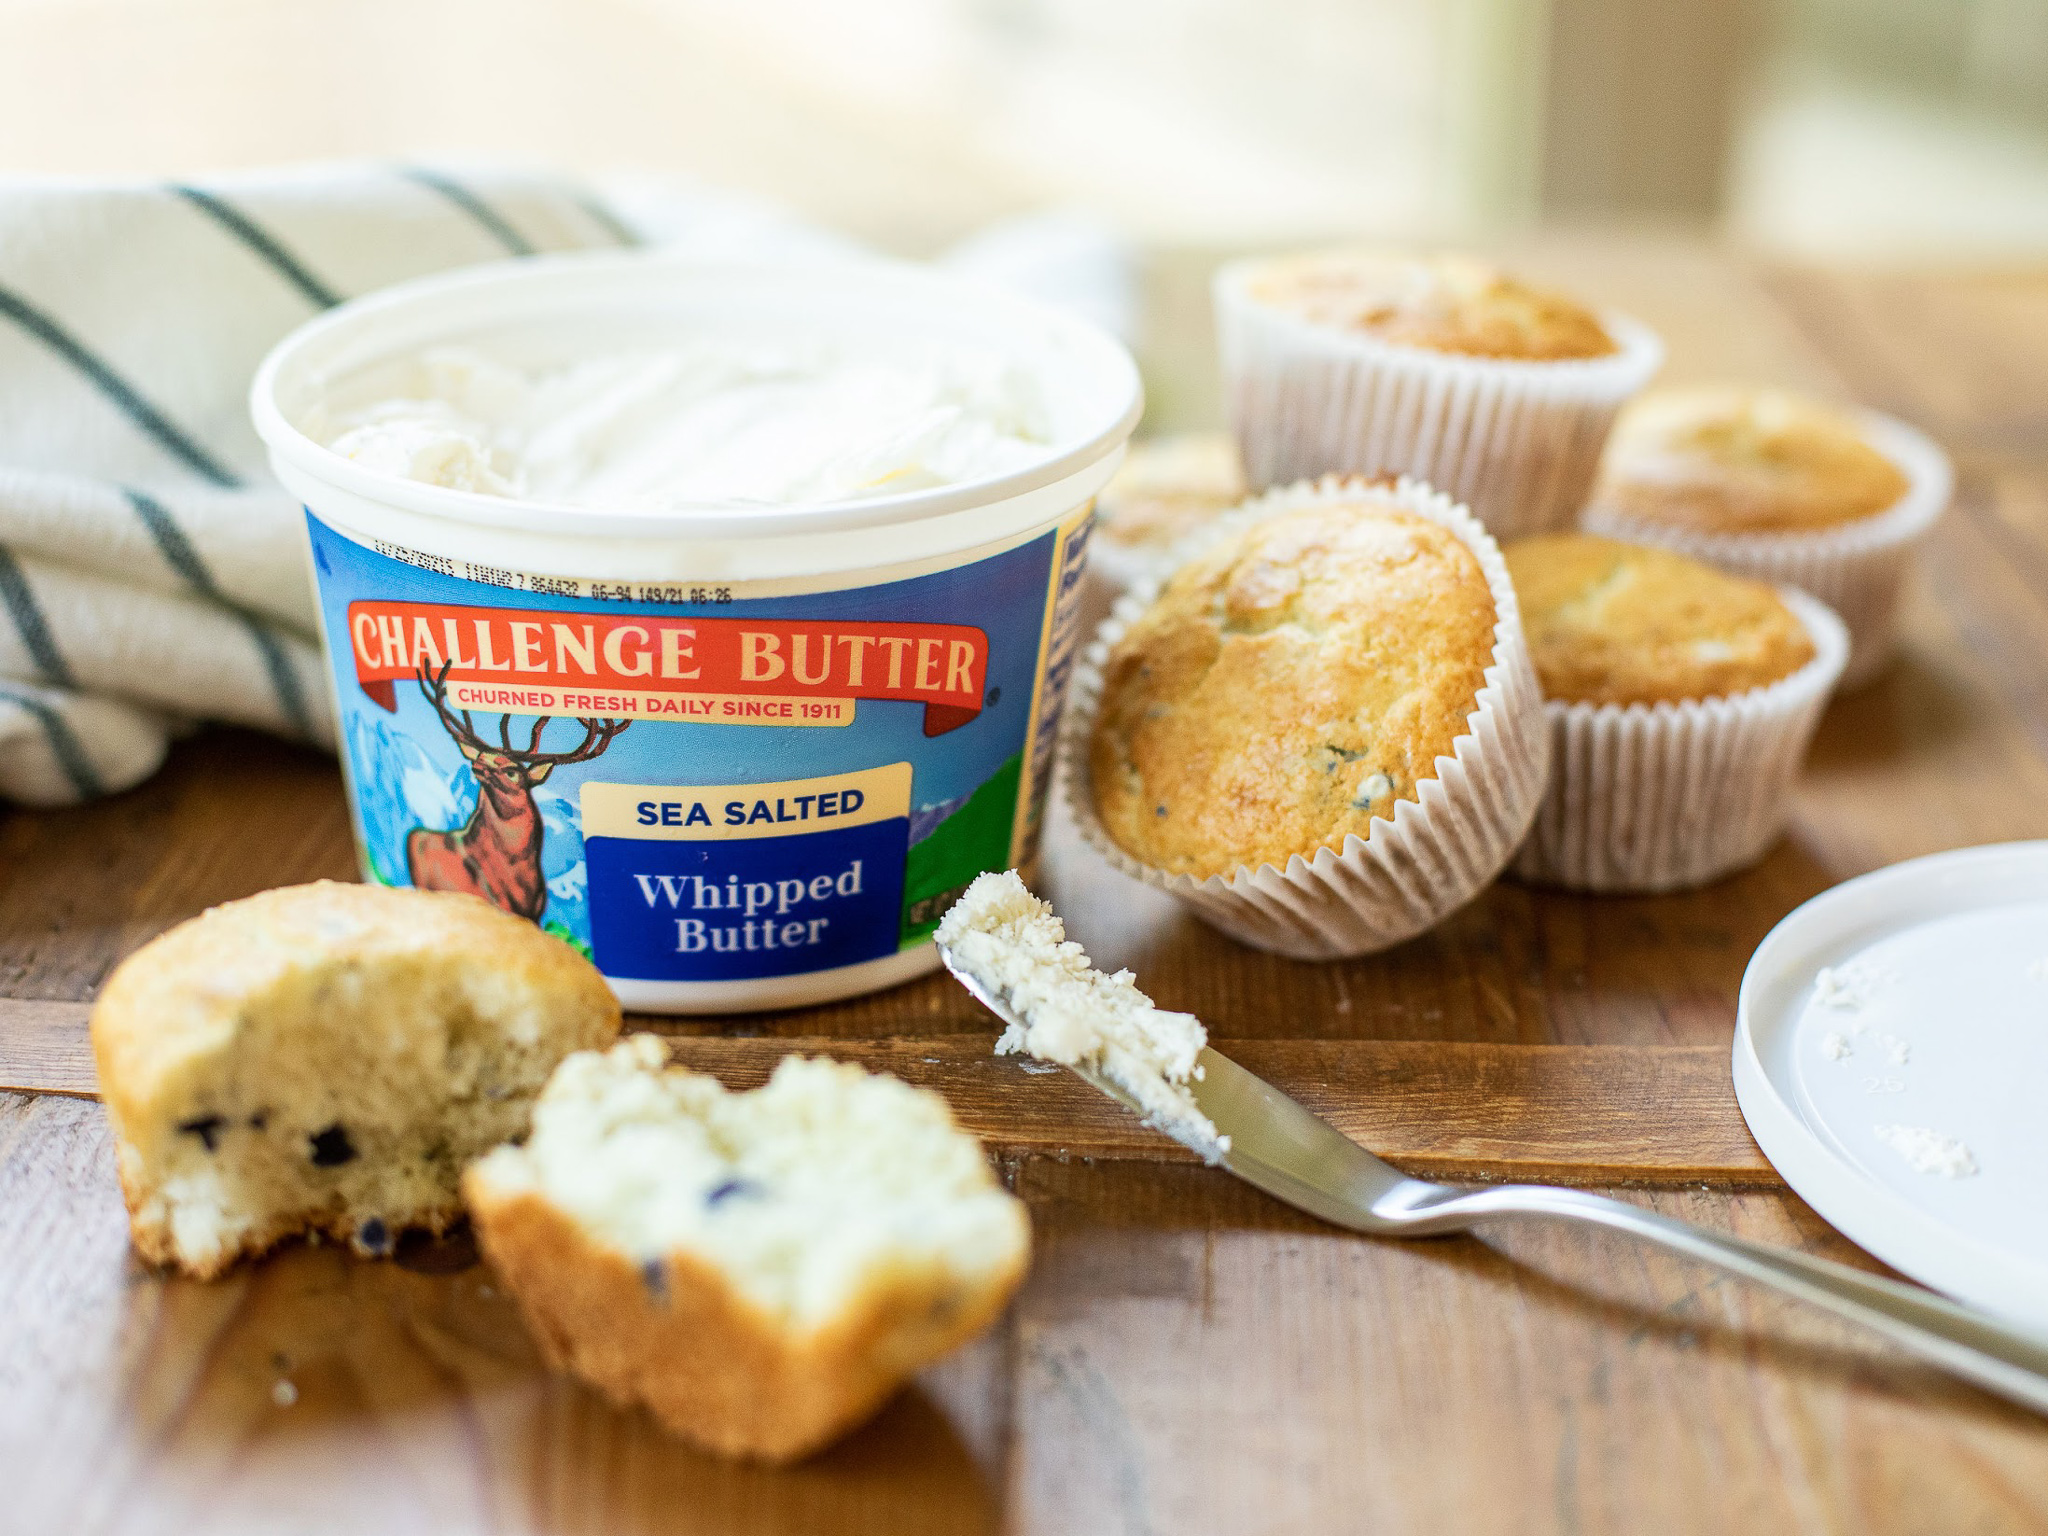 Pick Up A Great Deal On Challenge Butter This Week At Publix - New Whipped Butter Is As Low As 10¢! on I Heart Publix